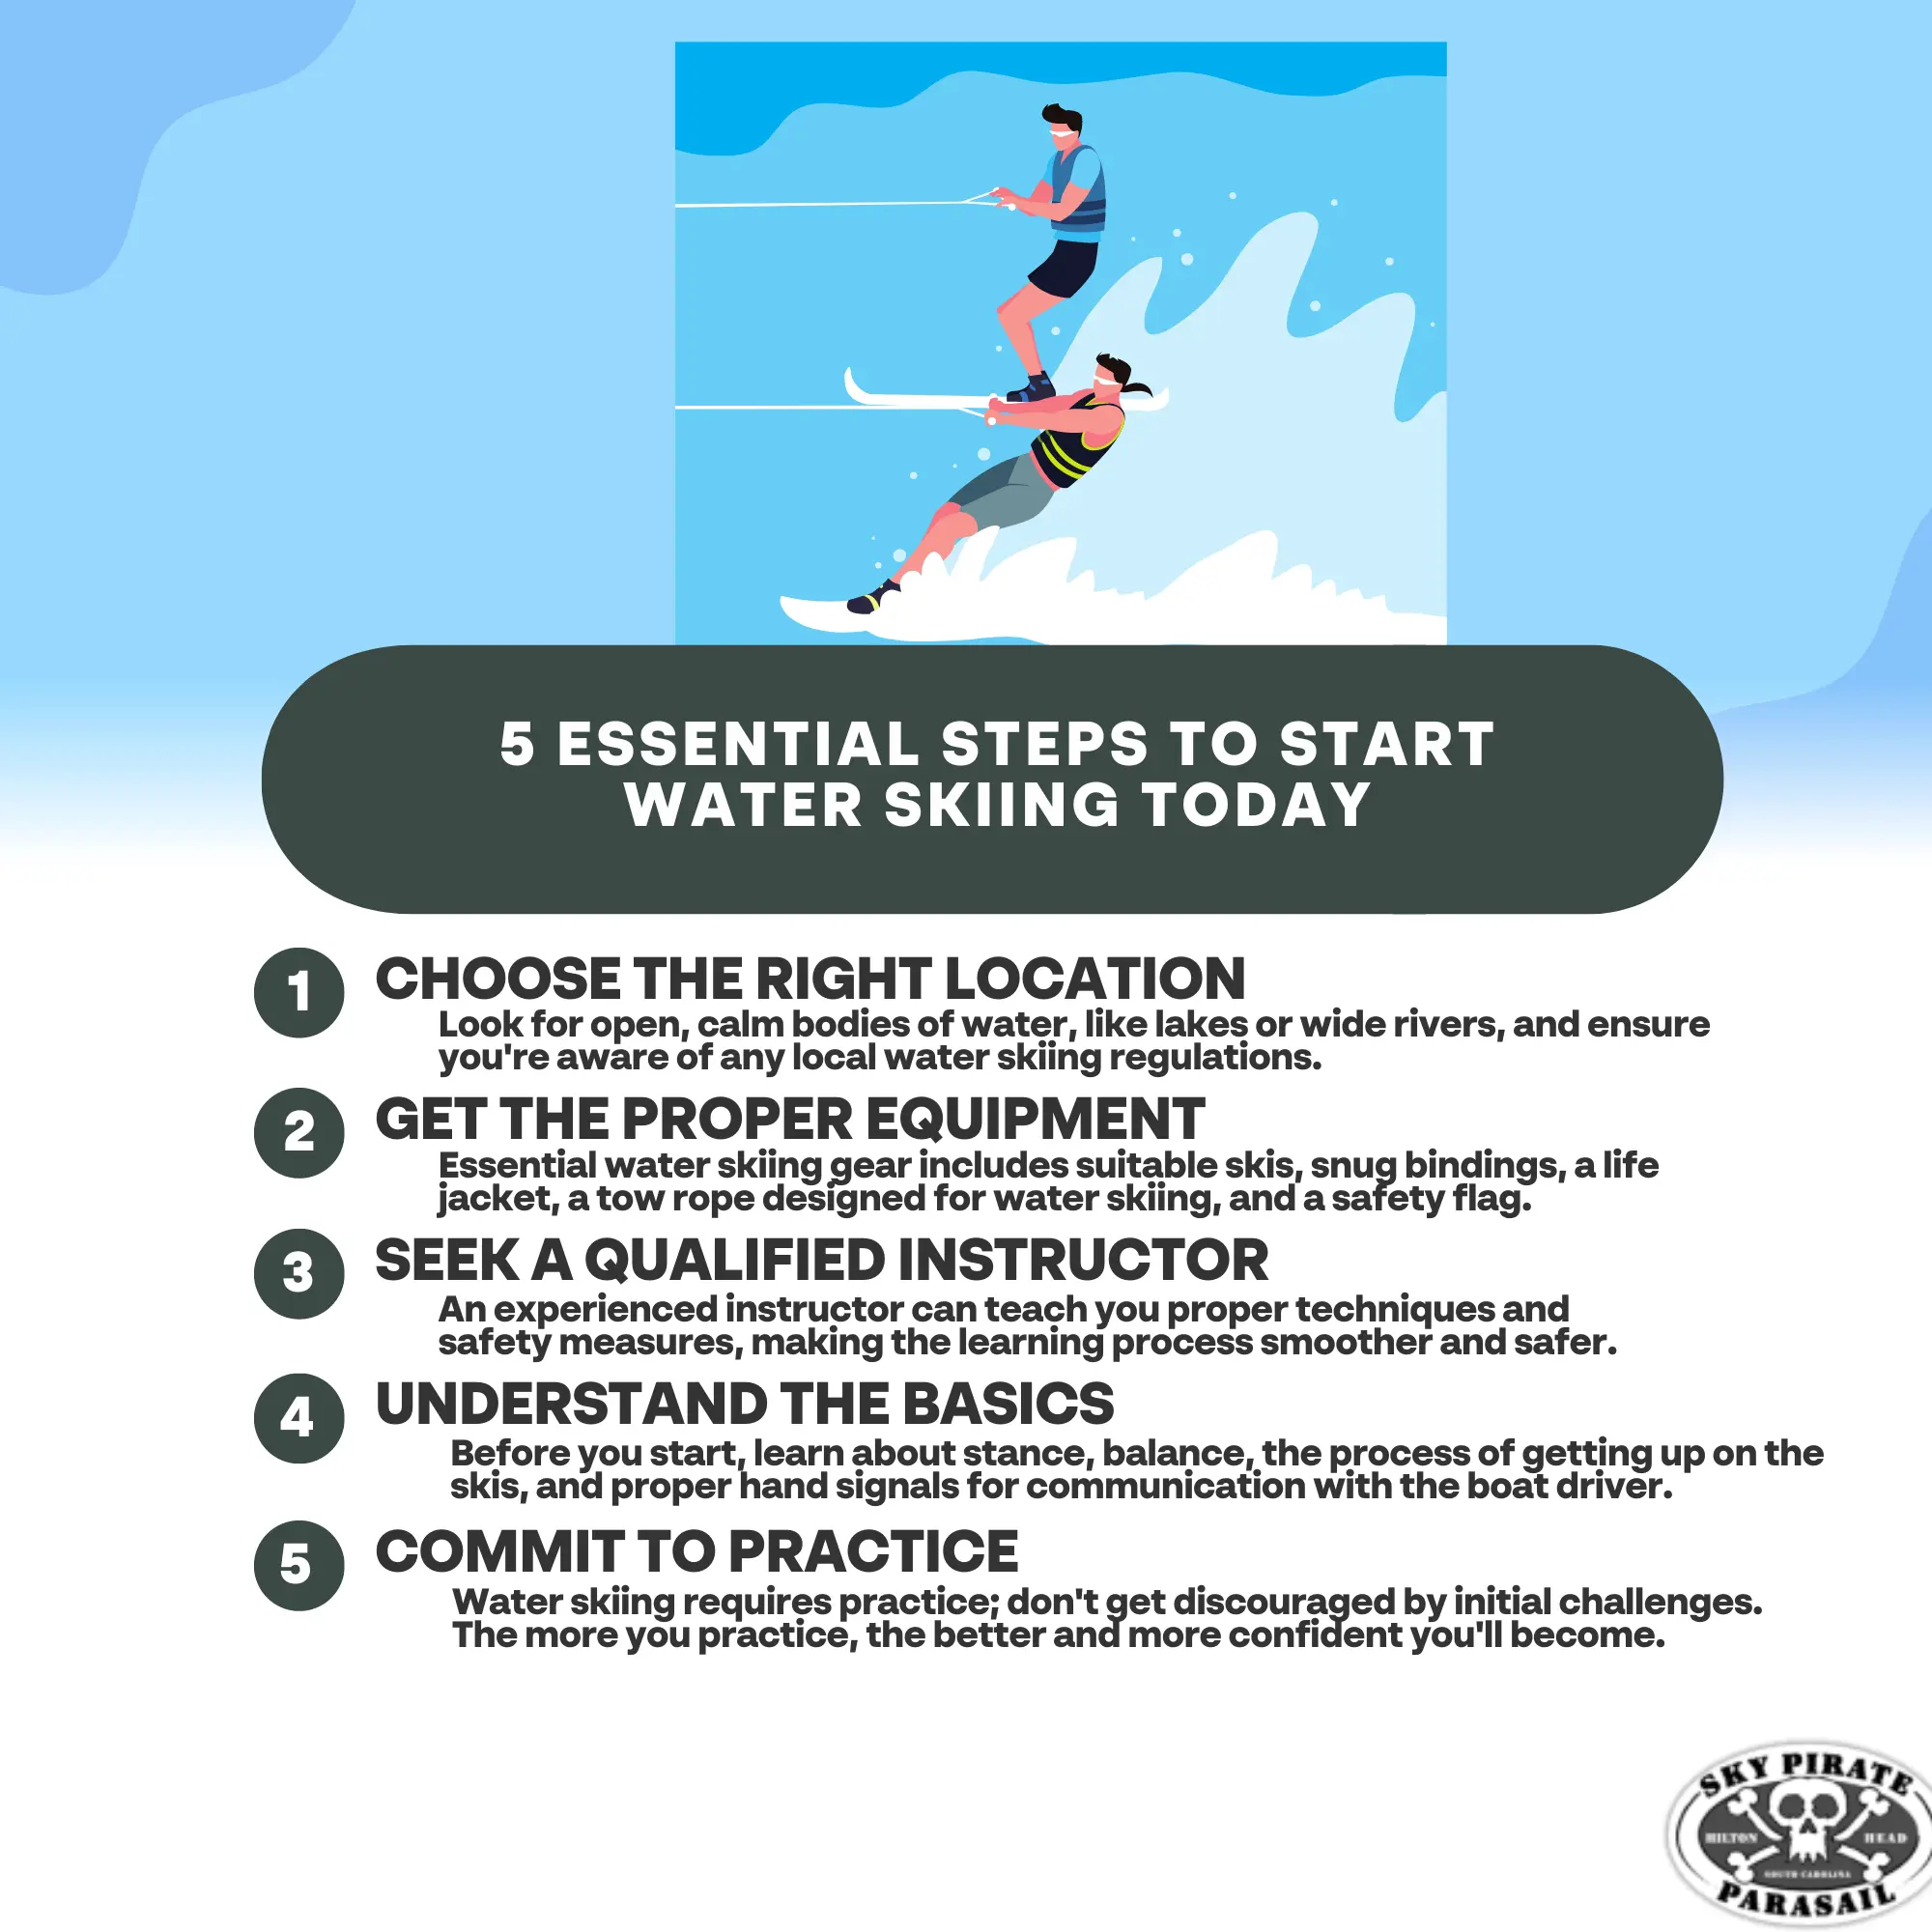 5 Essential Steps to Start Water Skiing Today